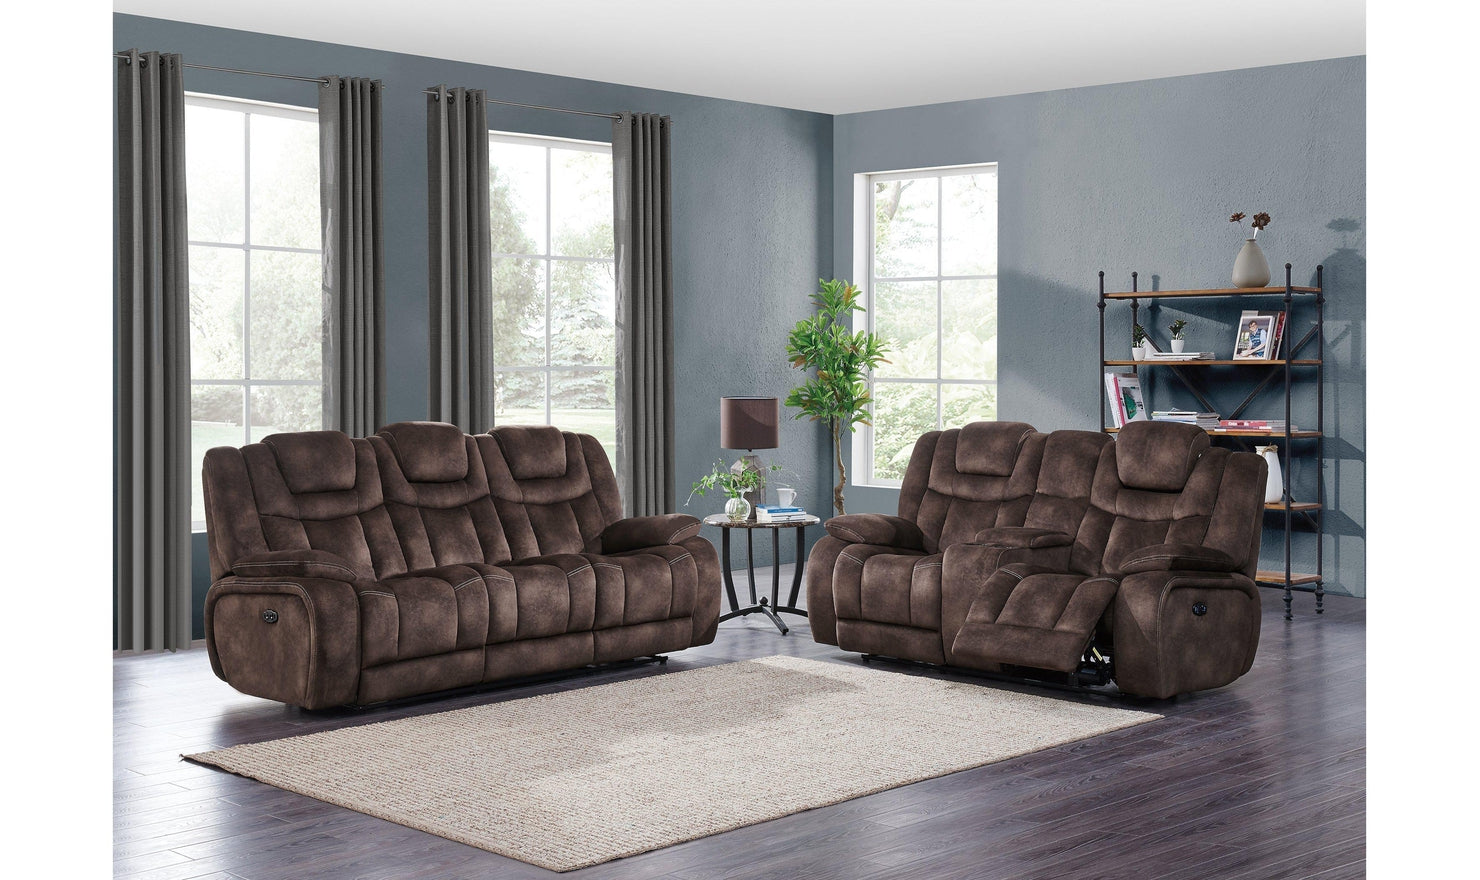 9 Different Types of Recliners Sofa – Jennifer Furniture